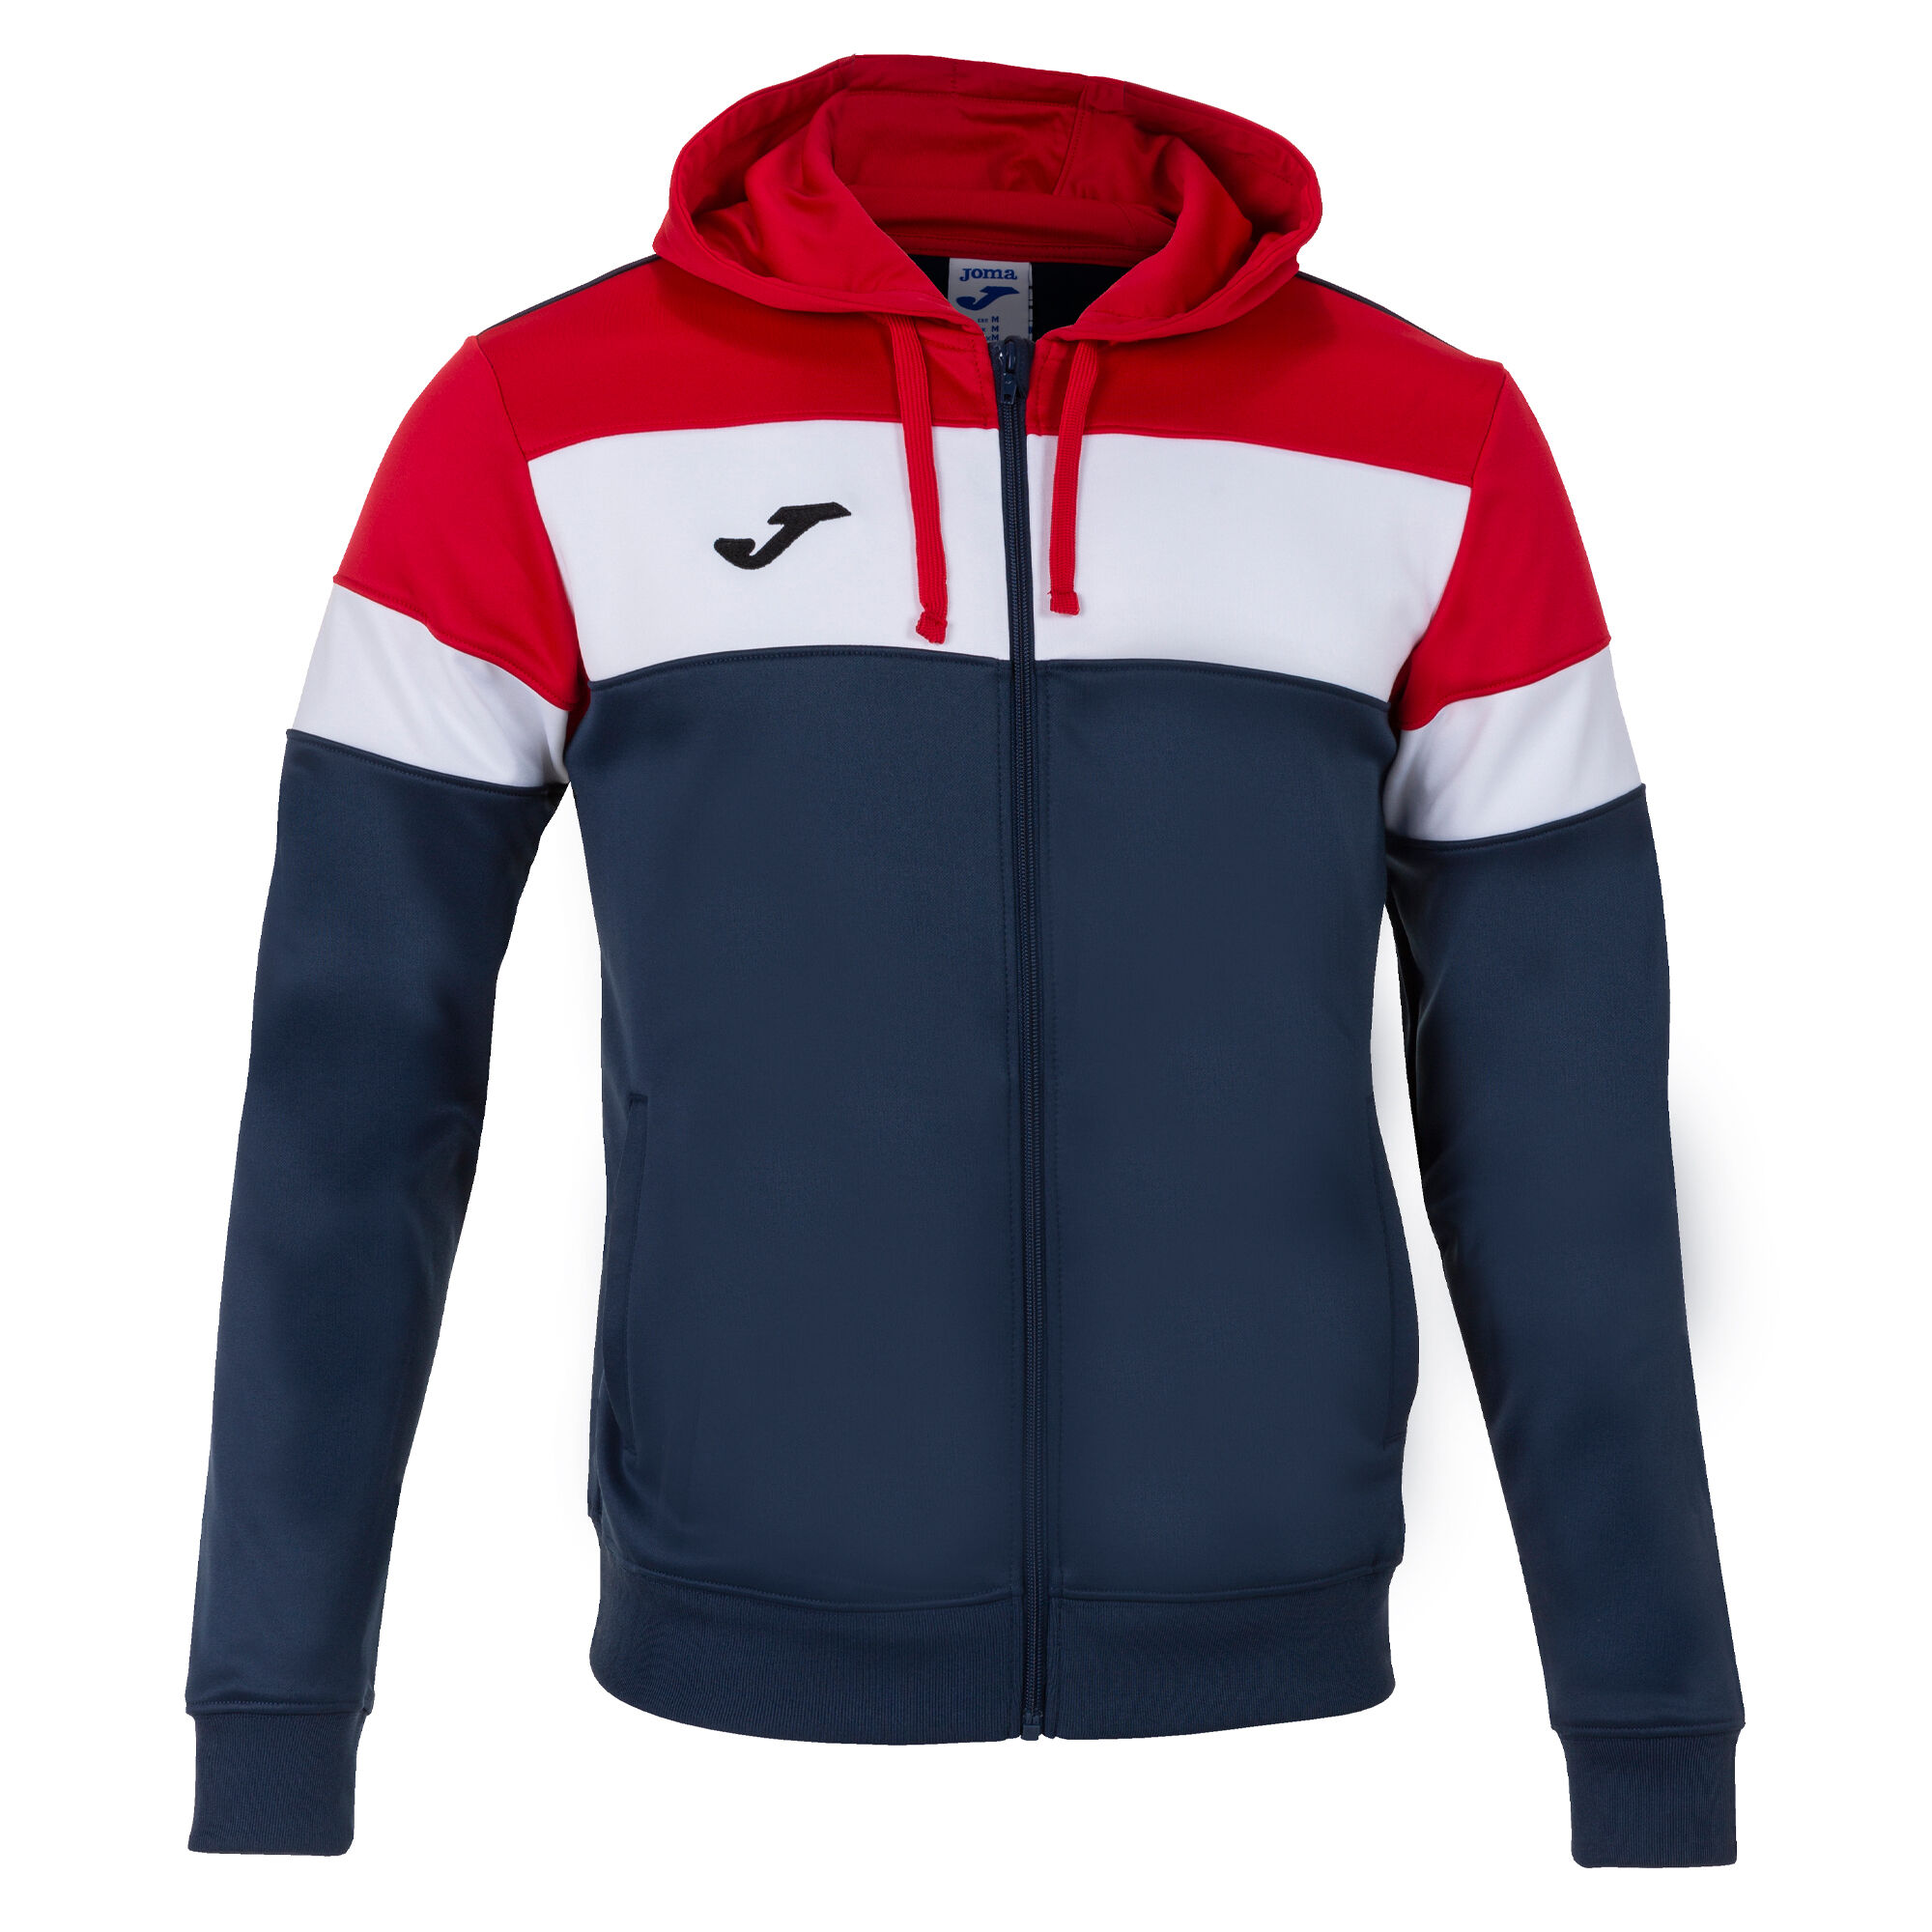 HOODED JACKET MAN CREW IV NAVY BLUE RED